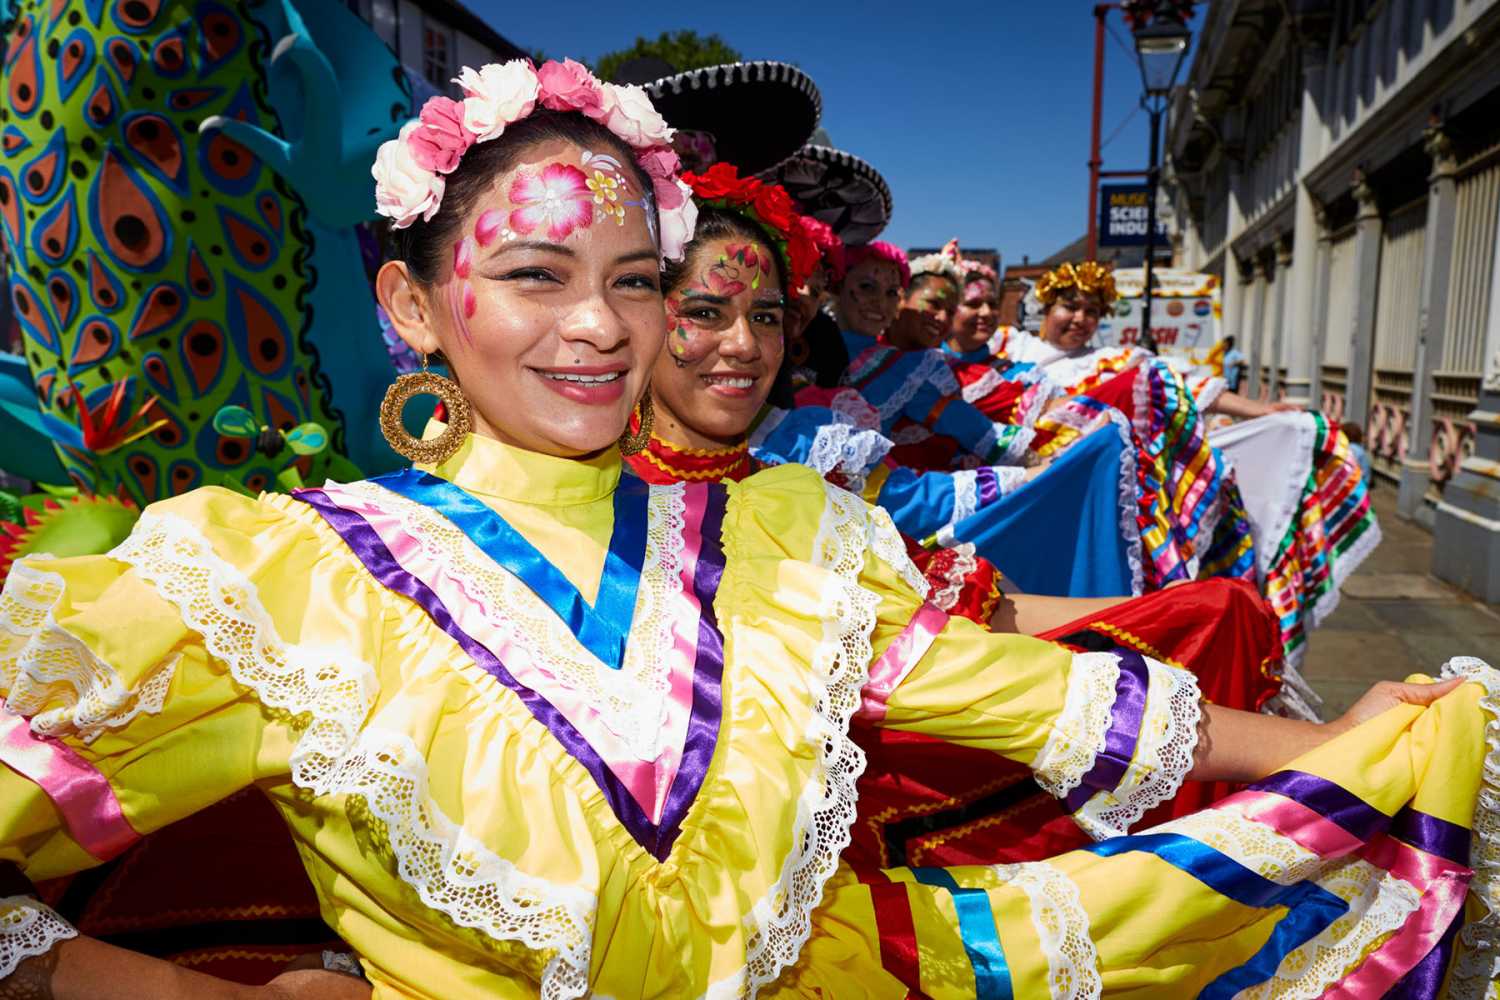 The event celebrated the diversity, strong communities and unstoppable spirit of the city and its people (photo: Mark Waugh)